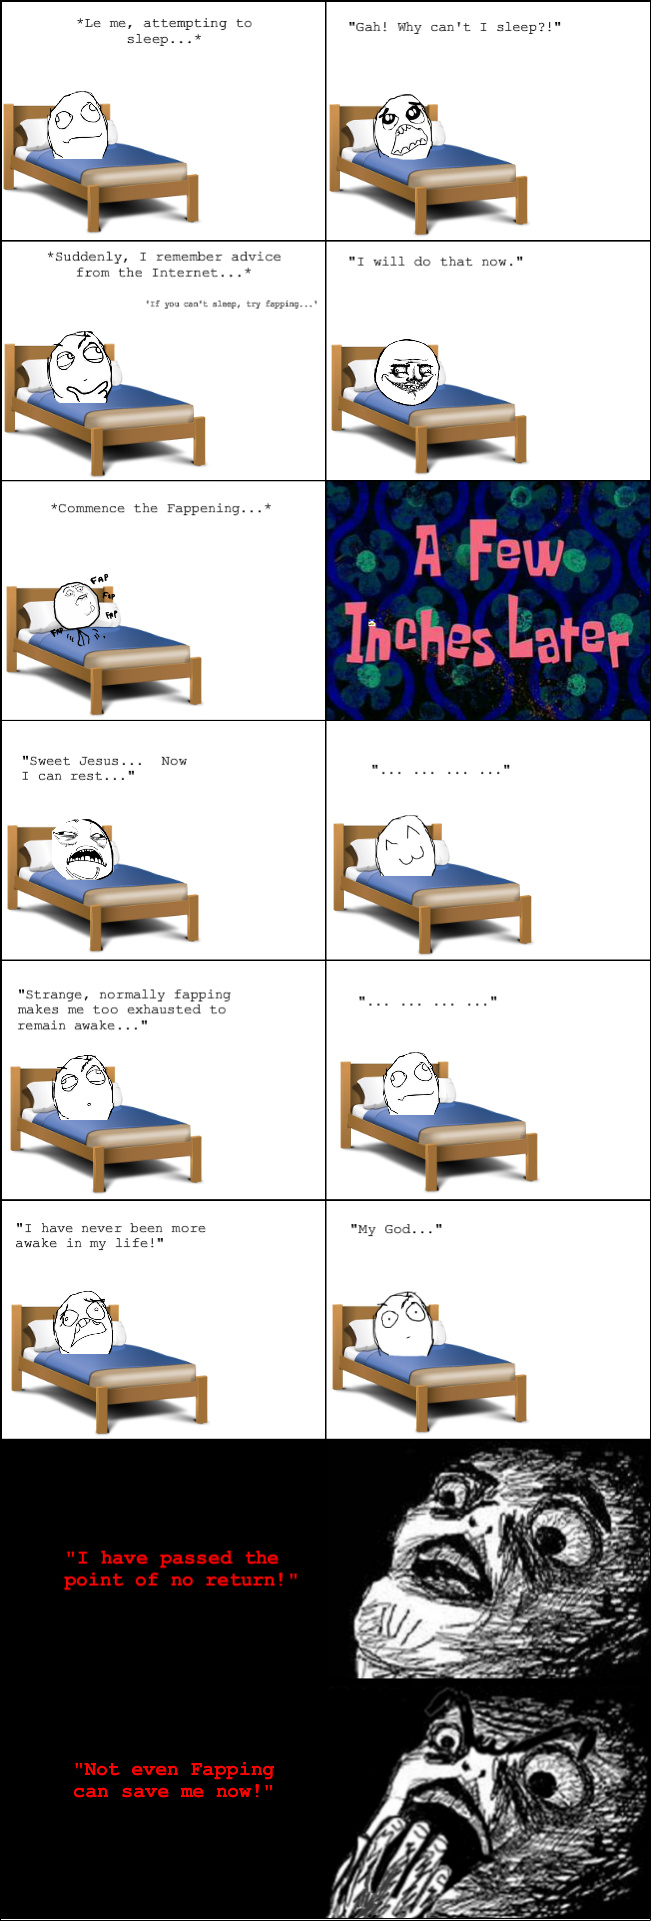 What happens when Fapping doesn't send you to sleep... - meme